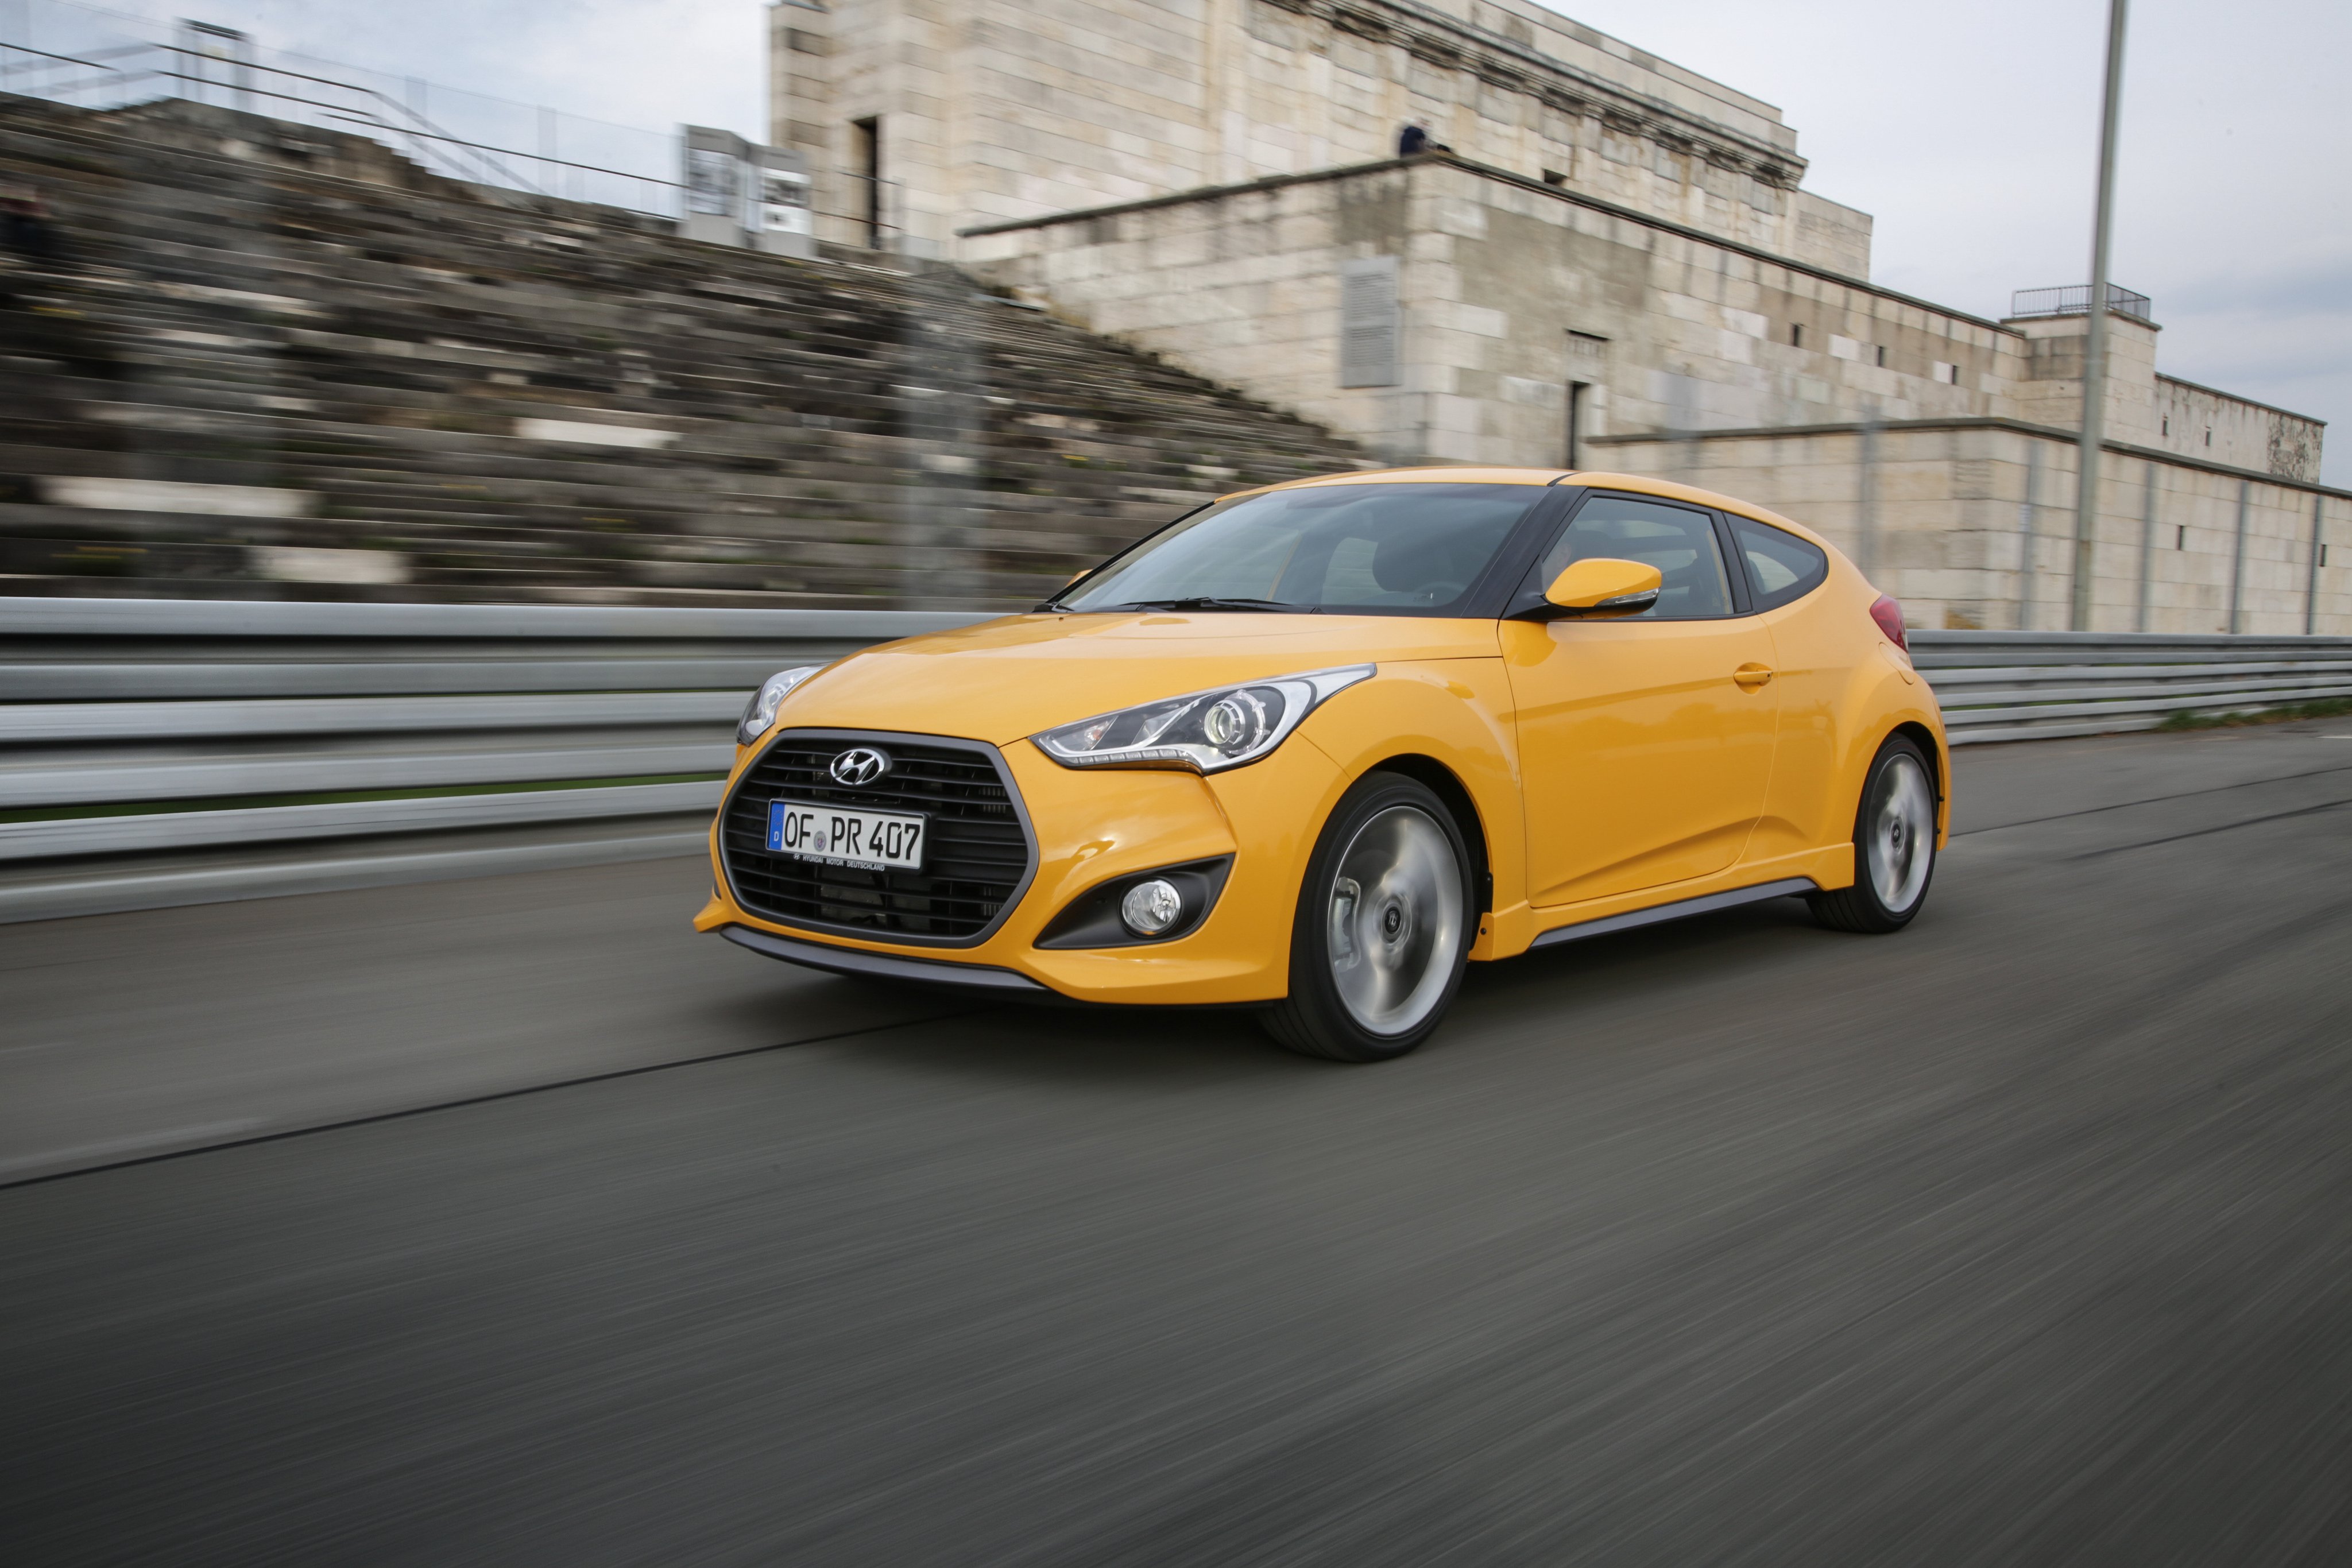 hyundai, Veloster, Turbo, Car, Coupe, Yellow, 2015 Wallpapers HD / Desktop  and Mobile Backgrounds